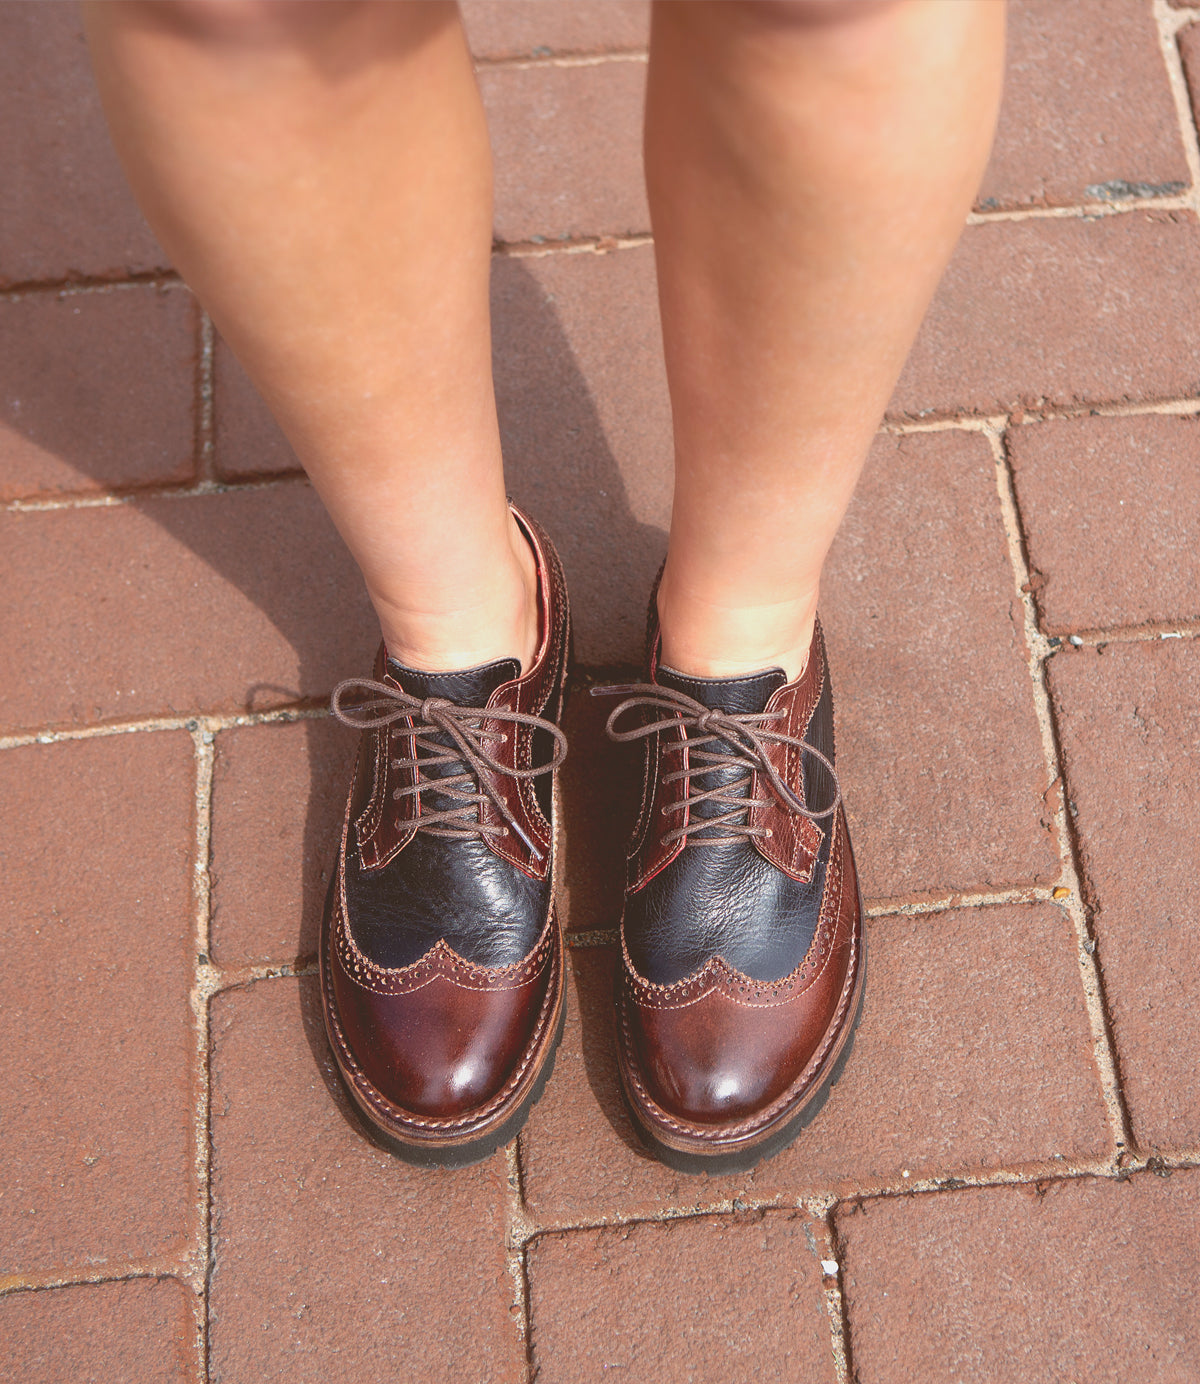 A pair of Bed Stu Lita K III brown leather wingtip shoes on brick pavement, viewed from above, epitomizing retro chic.